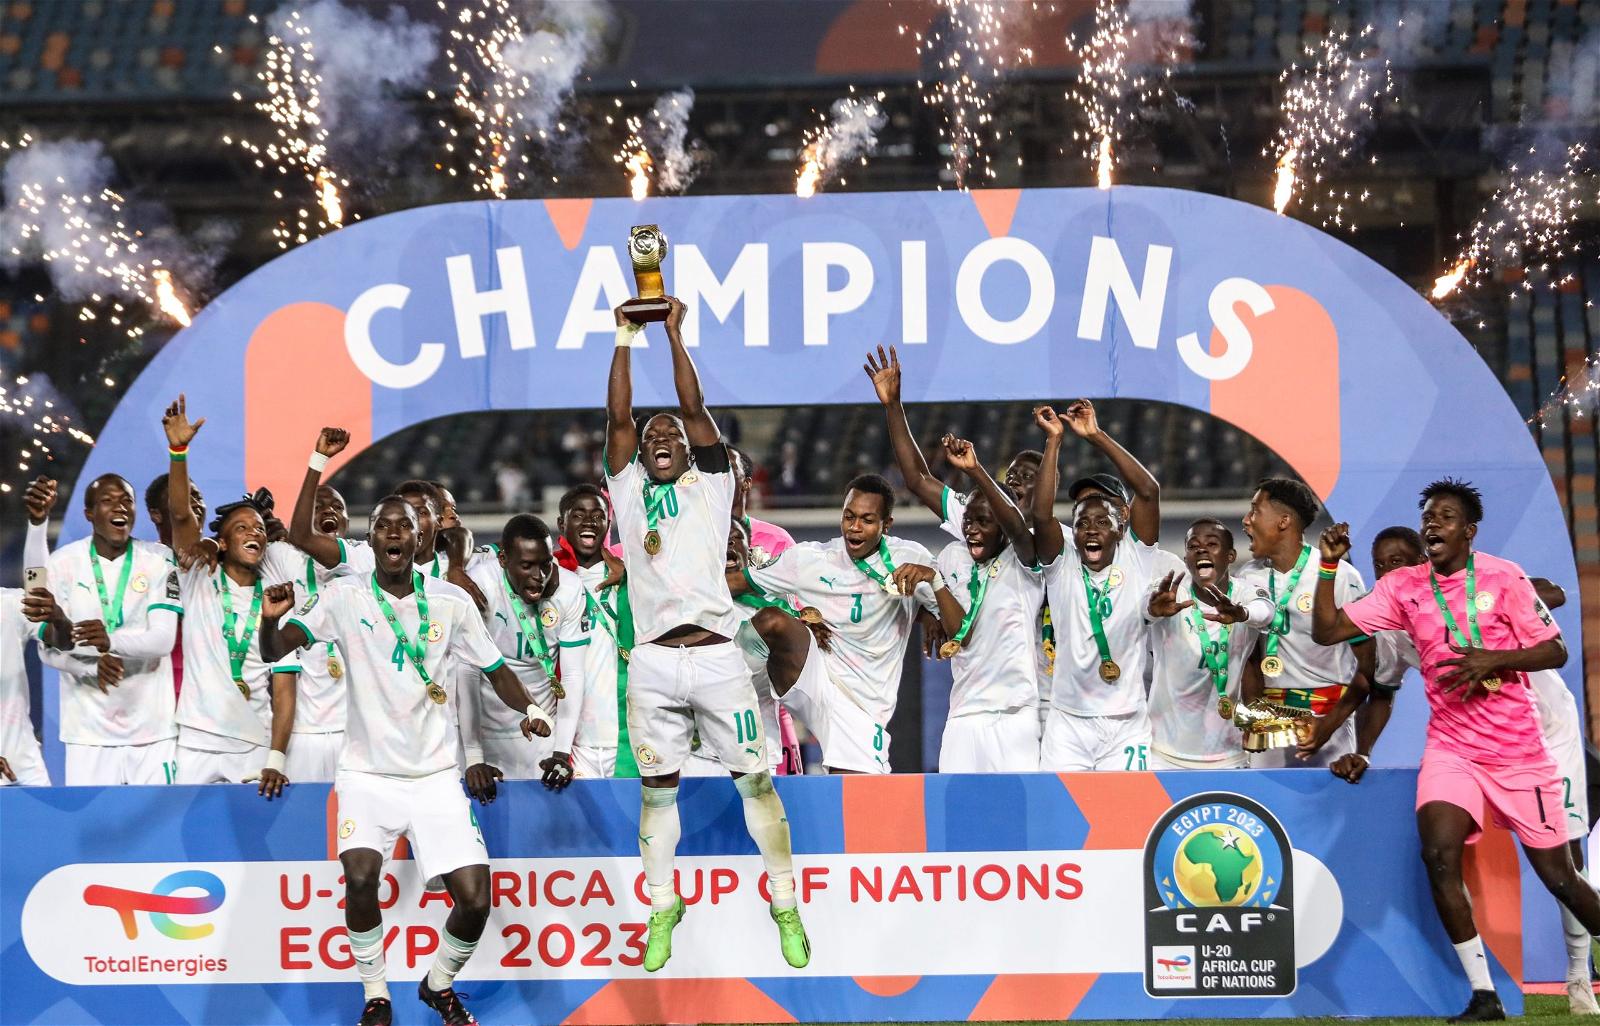 AFCON: Senegal beats Egypt to win Africa Cup of Nations trophy